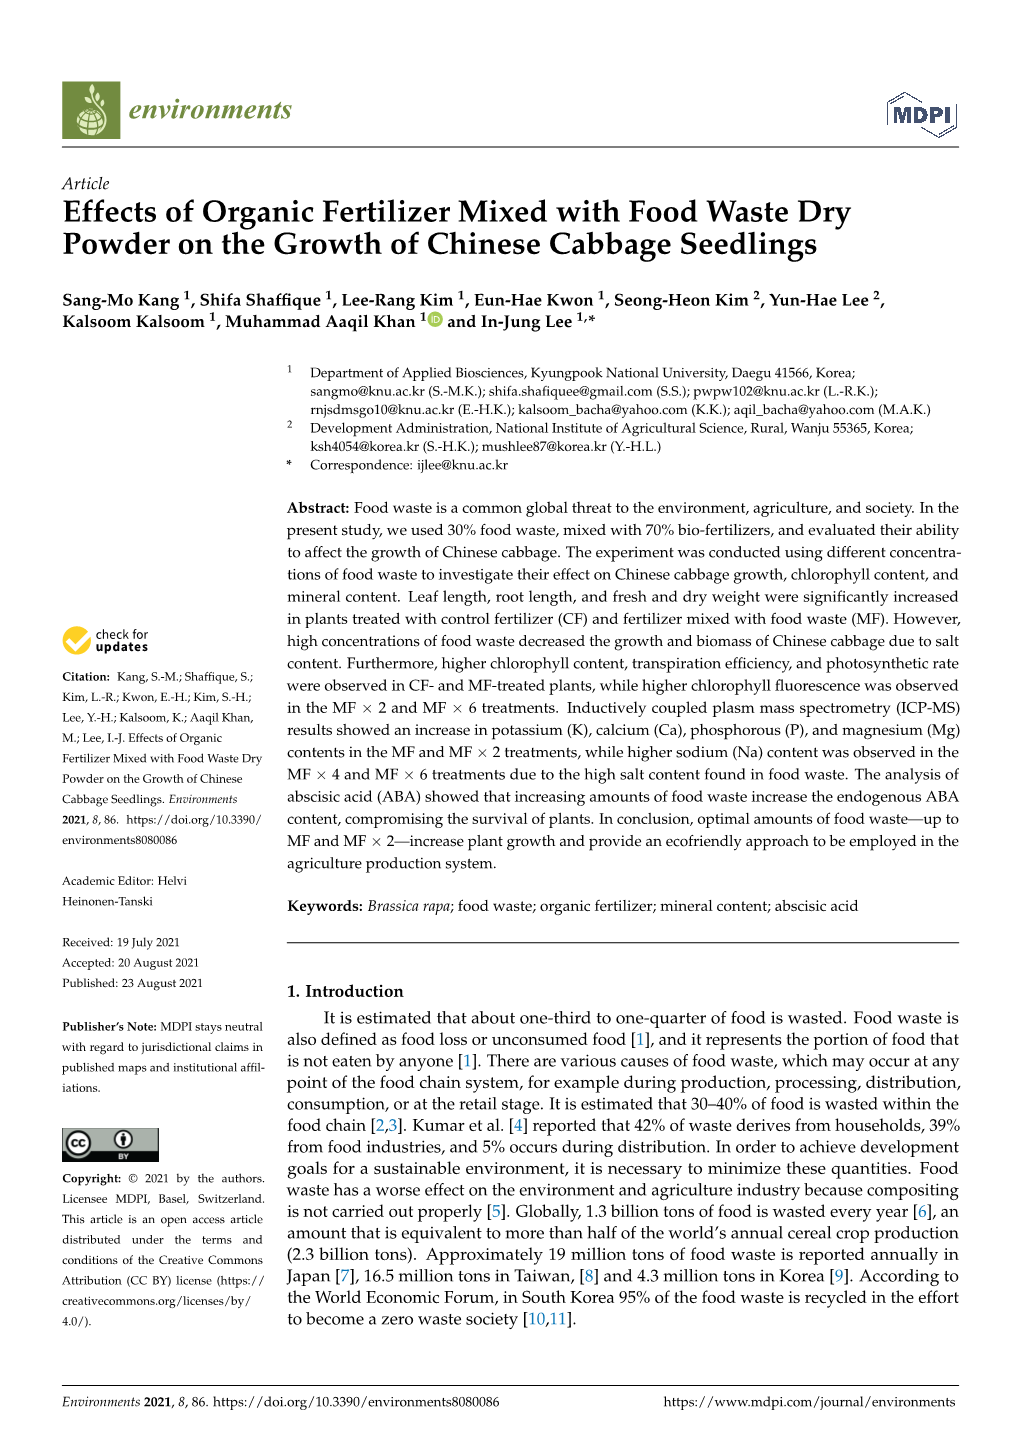 Effects of Organic Fertilizer Mixed with Food Waste Dry Powder on the Growth of Chinese Cabbage Seedlings